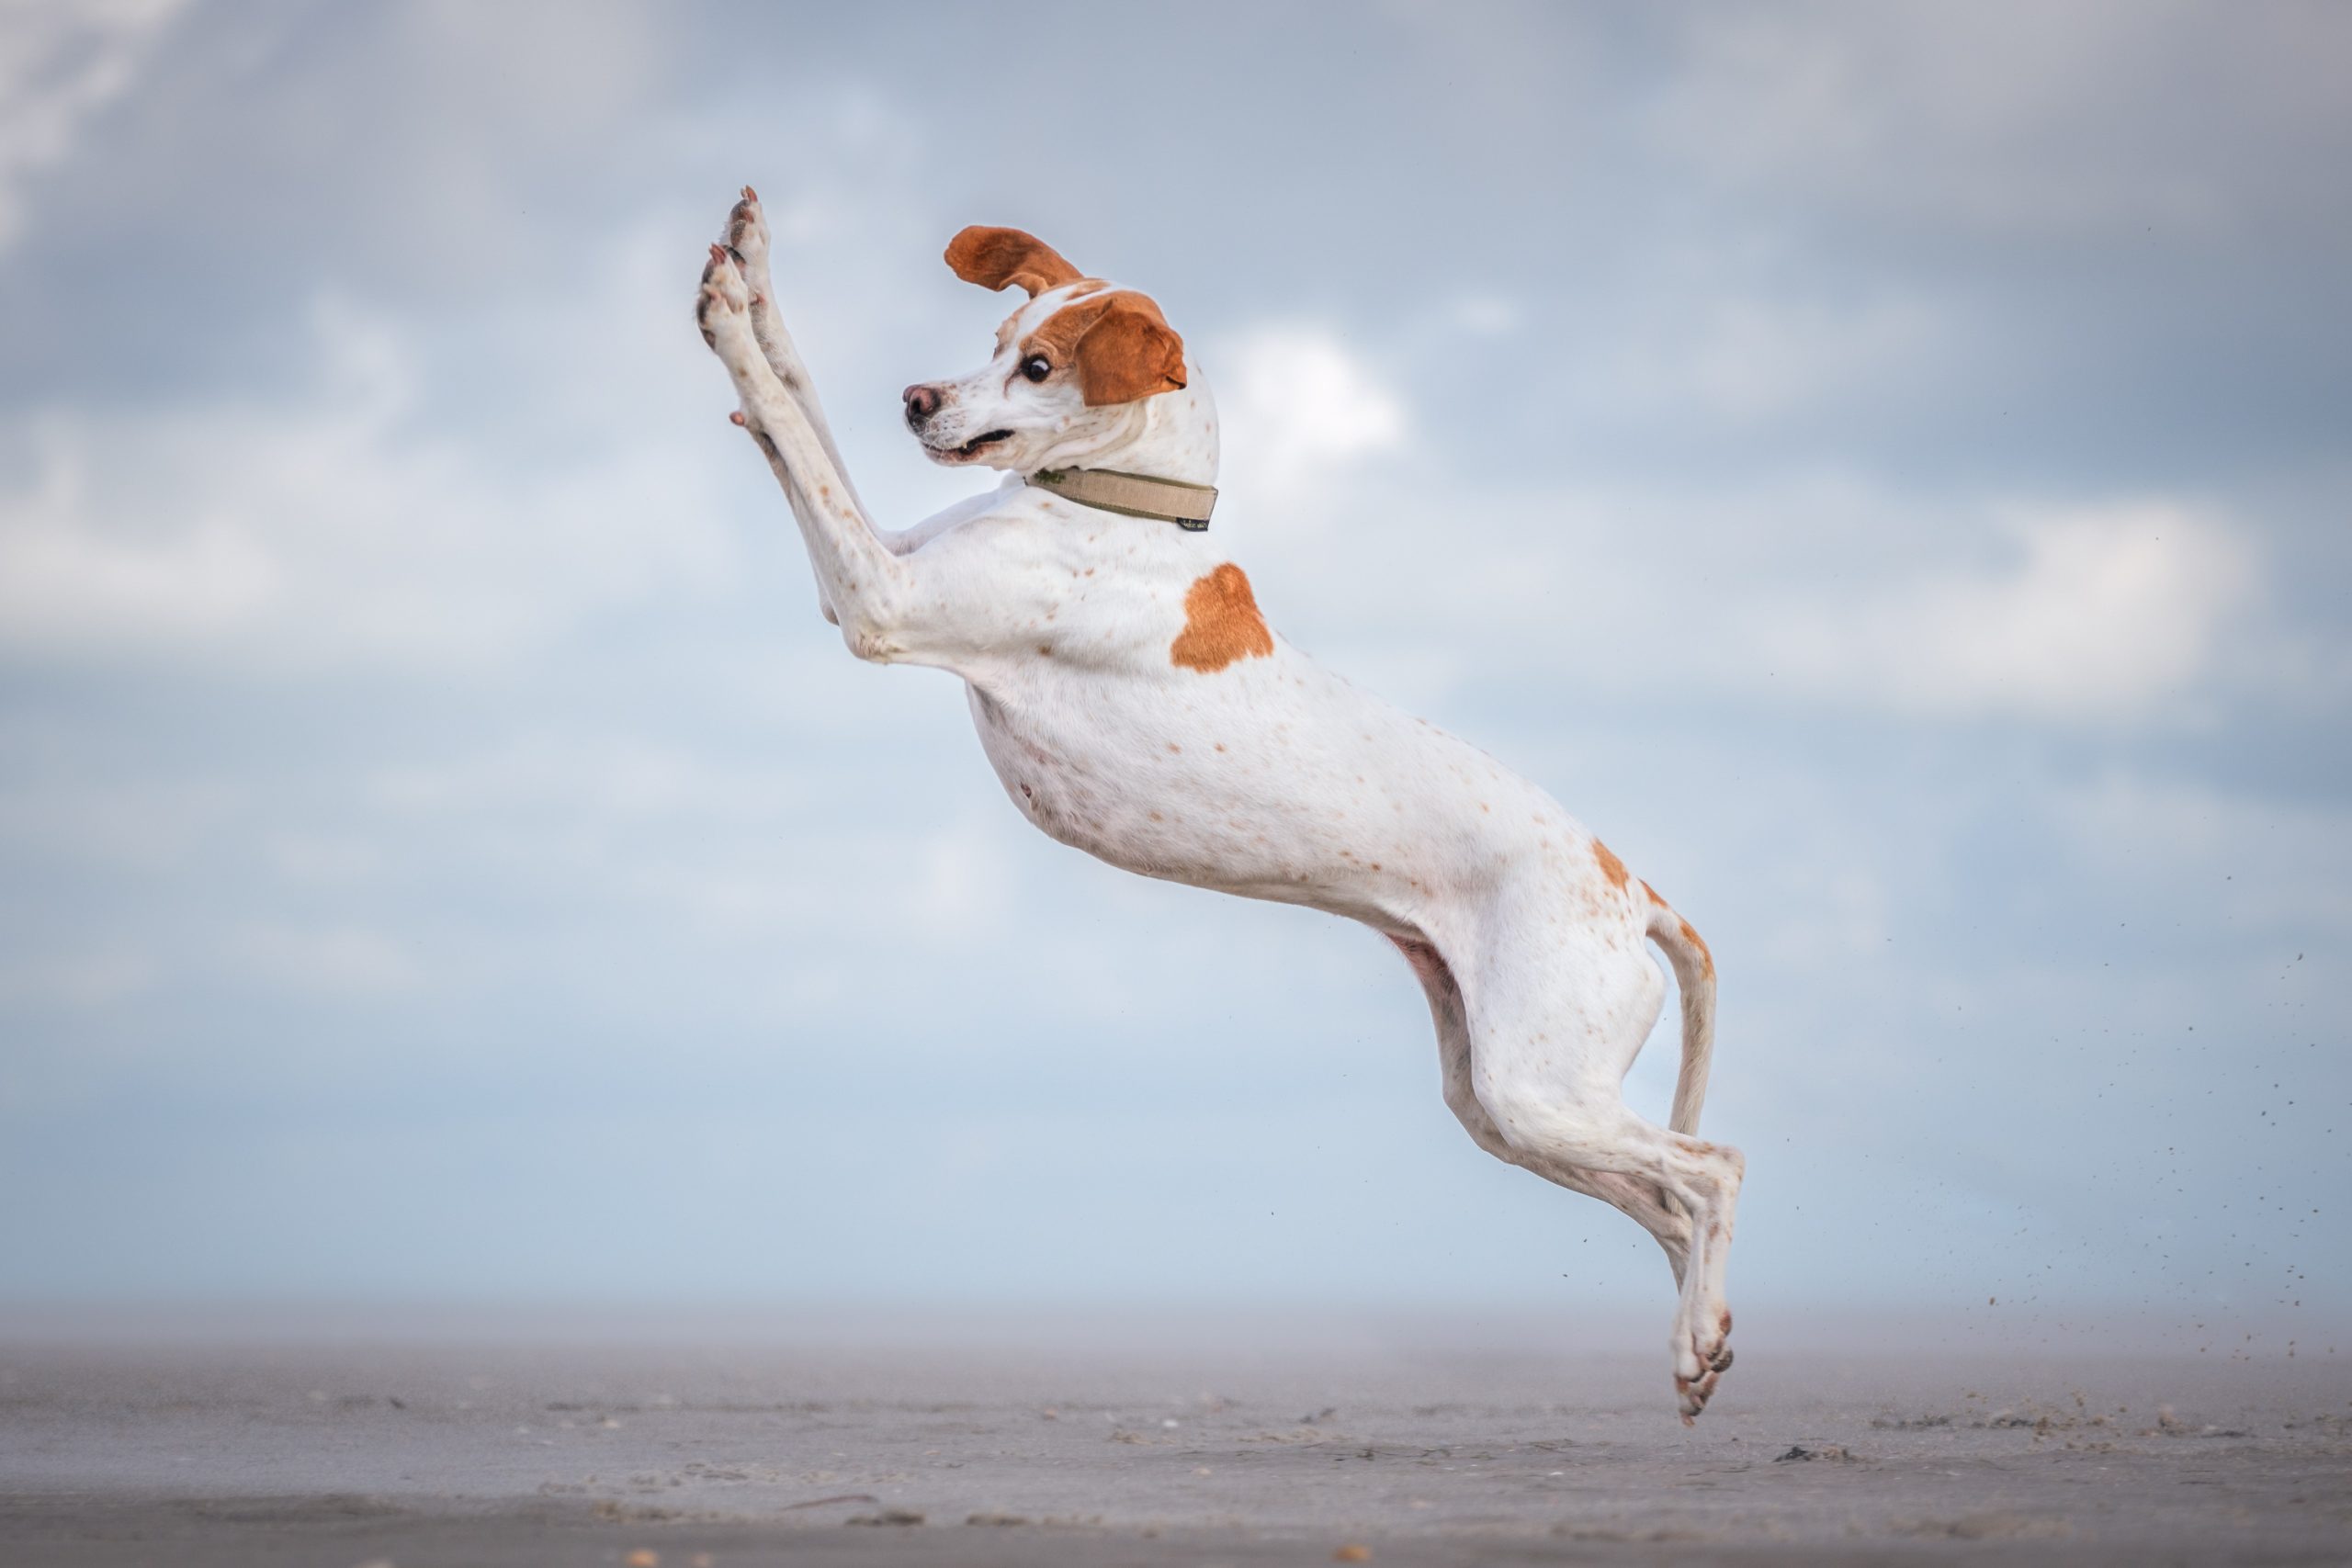 The Comedy Pet Photography Awards 2024 Vera Faupel Fritzlar Germany Title: Dancing queen Description: What can I say. This dog loves to jump! Animal: Pepper, pointer dog Location of shot: Germany